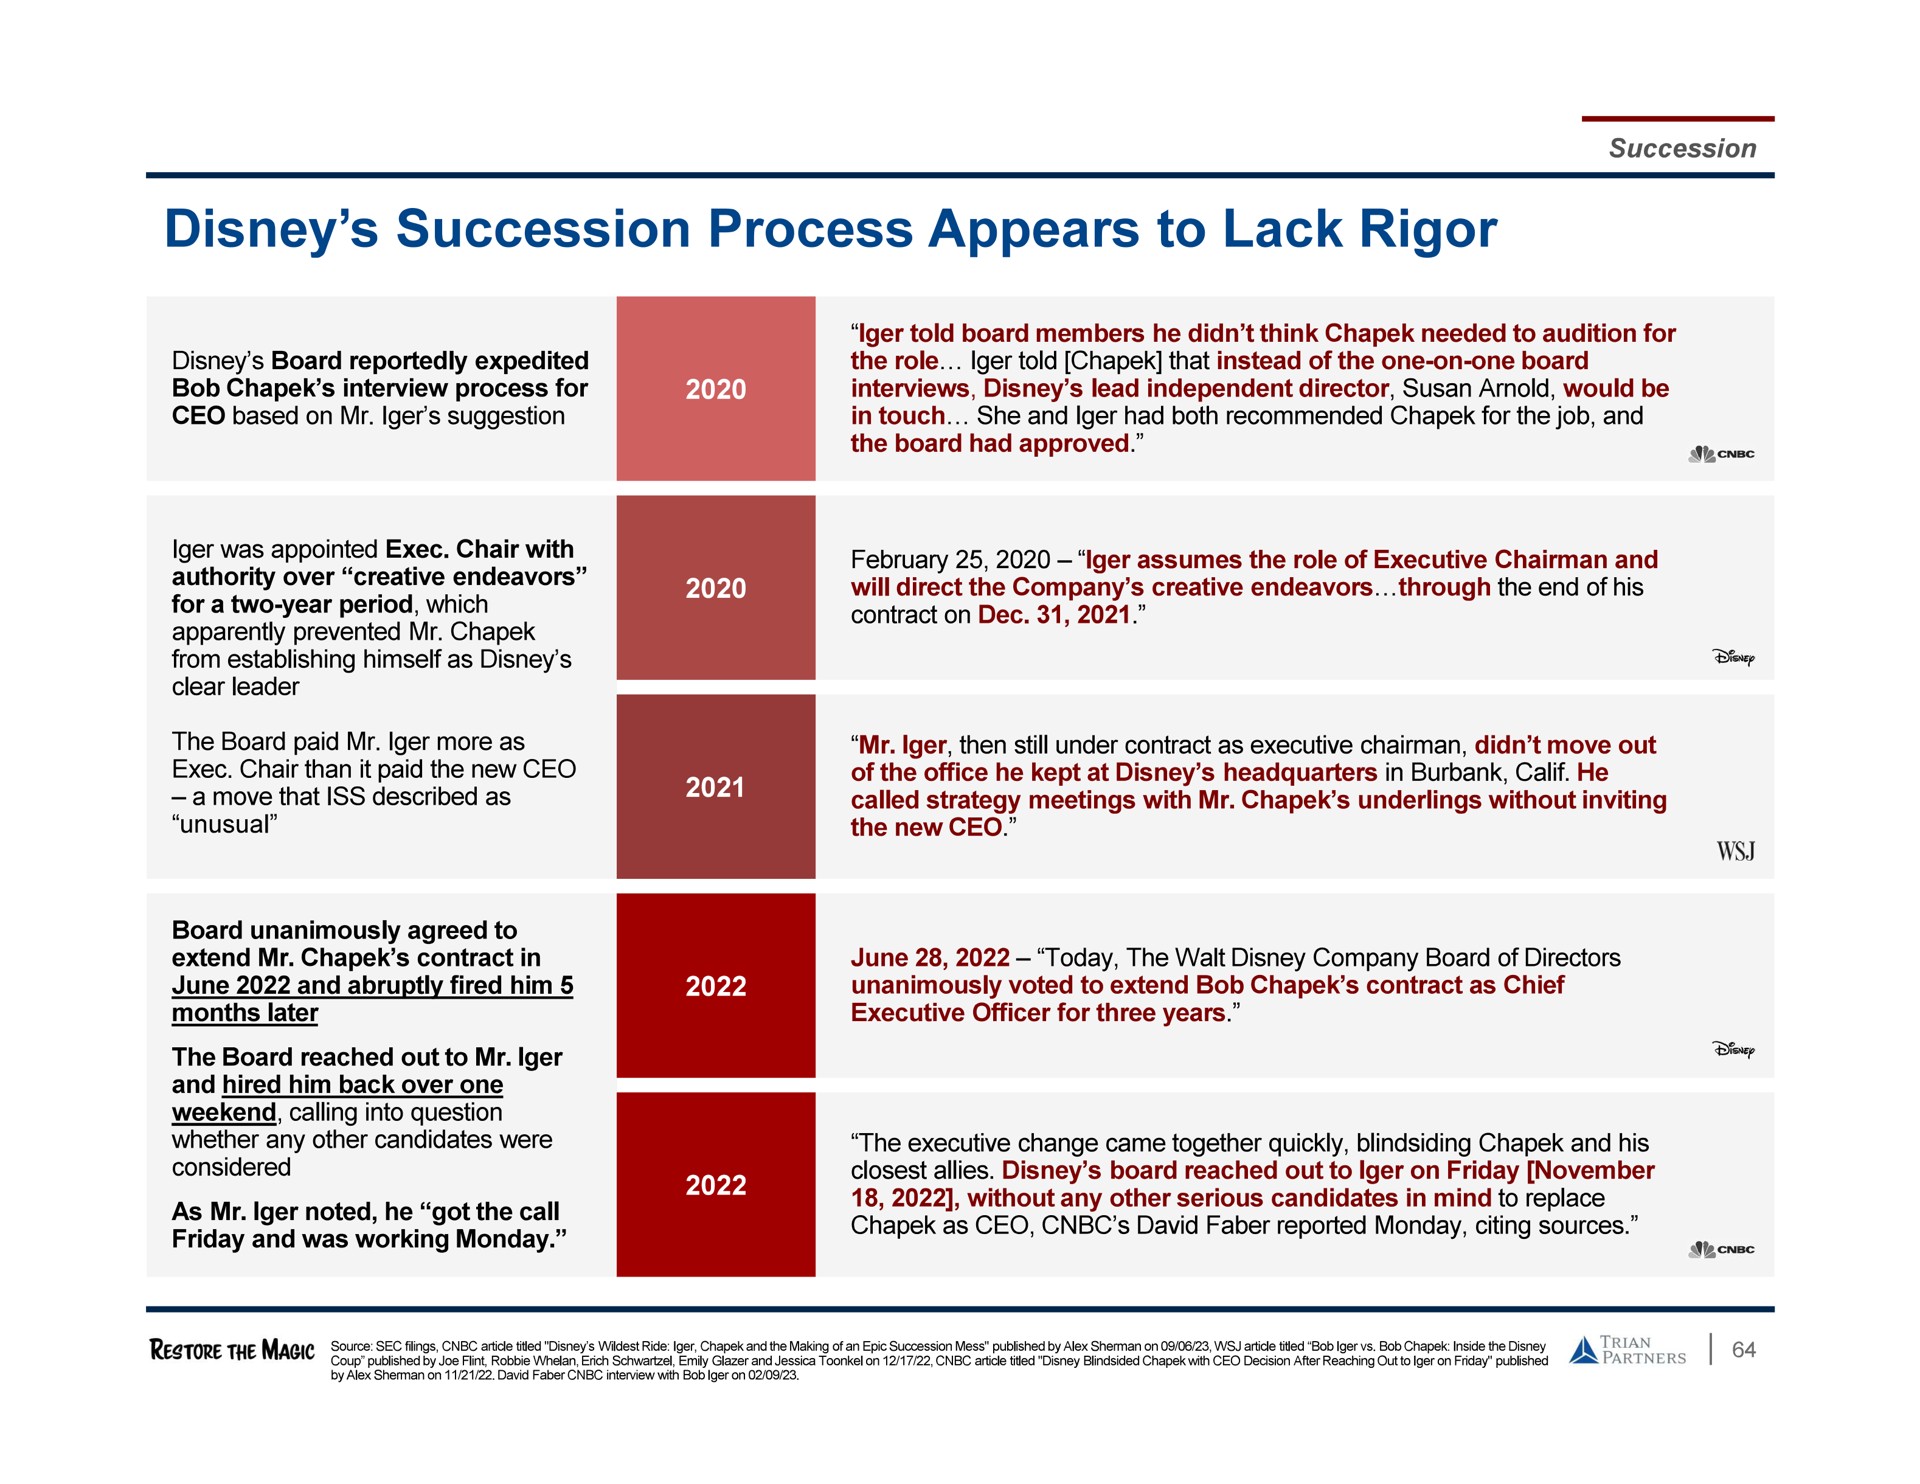 succession process appears to lack rigor | Trian Partners